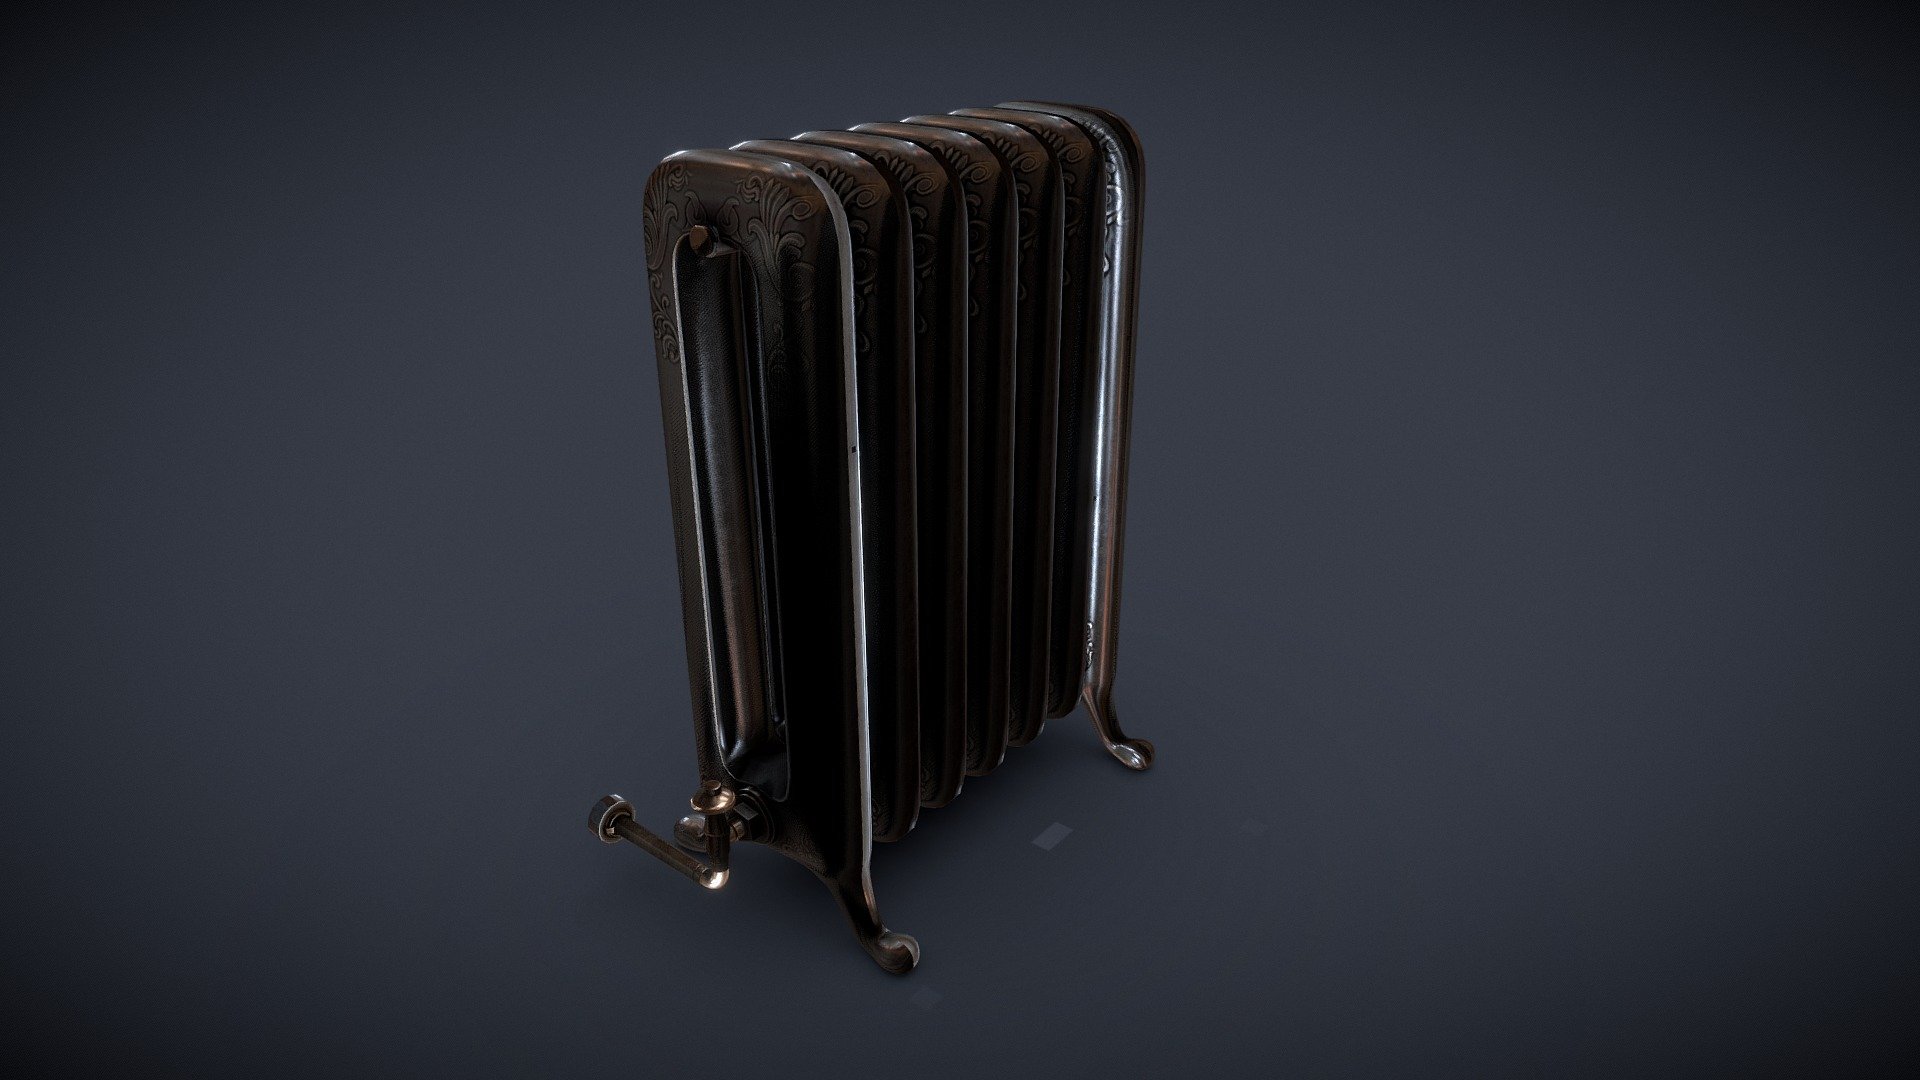 Hello Folks! This is an asset for a personnal project of a Victorian scenary. An old radiator to warm the room :)

Made with Maya, PS and Substance.

You will find in the package Scene file, FBX and 2k Textures.
If you have any customs need, please feel free to contact me 3d model